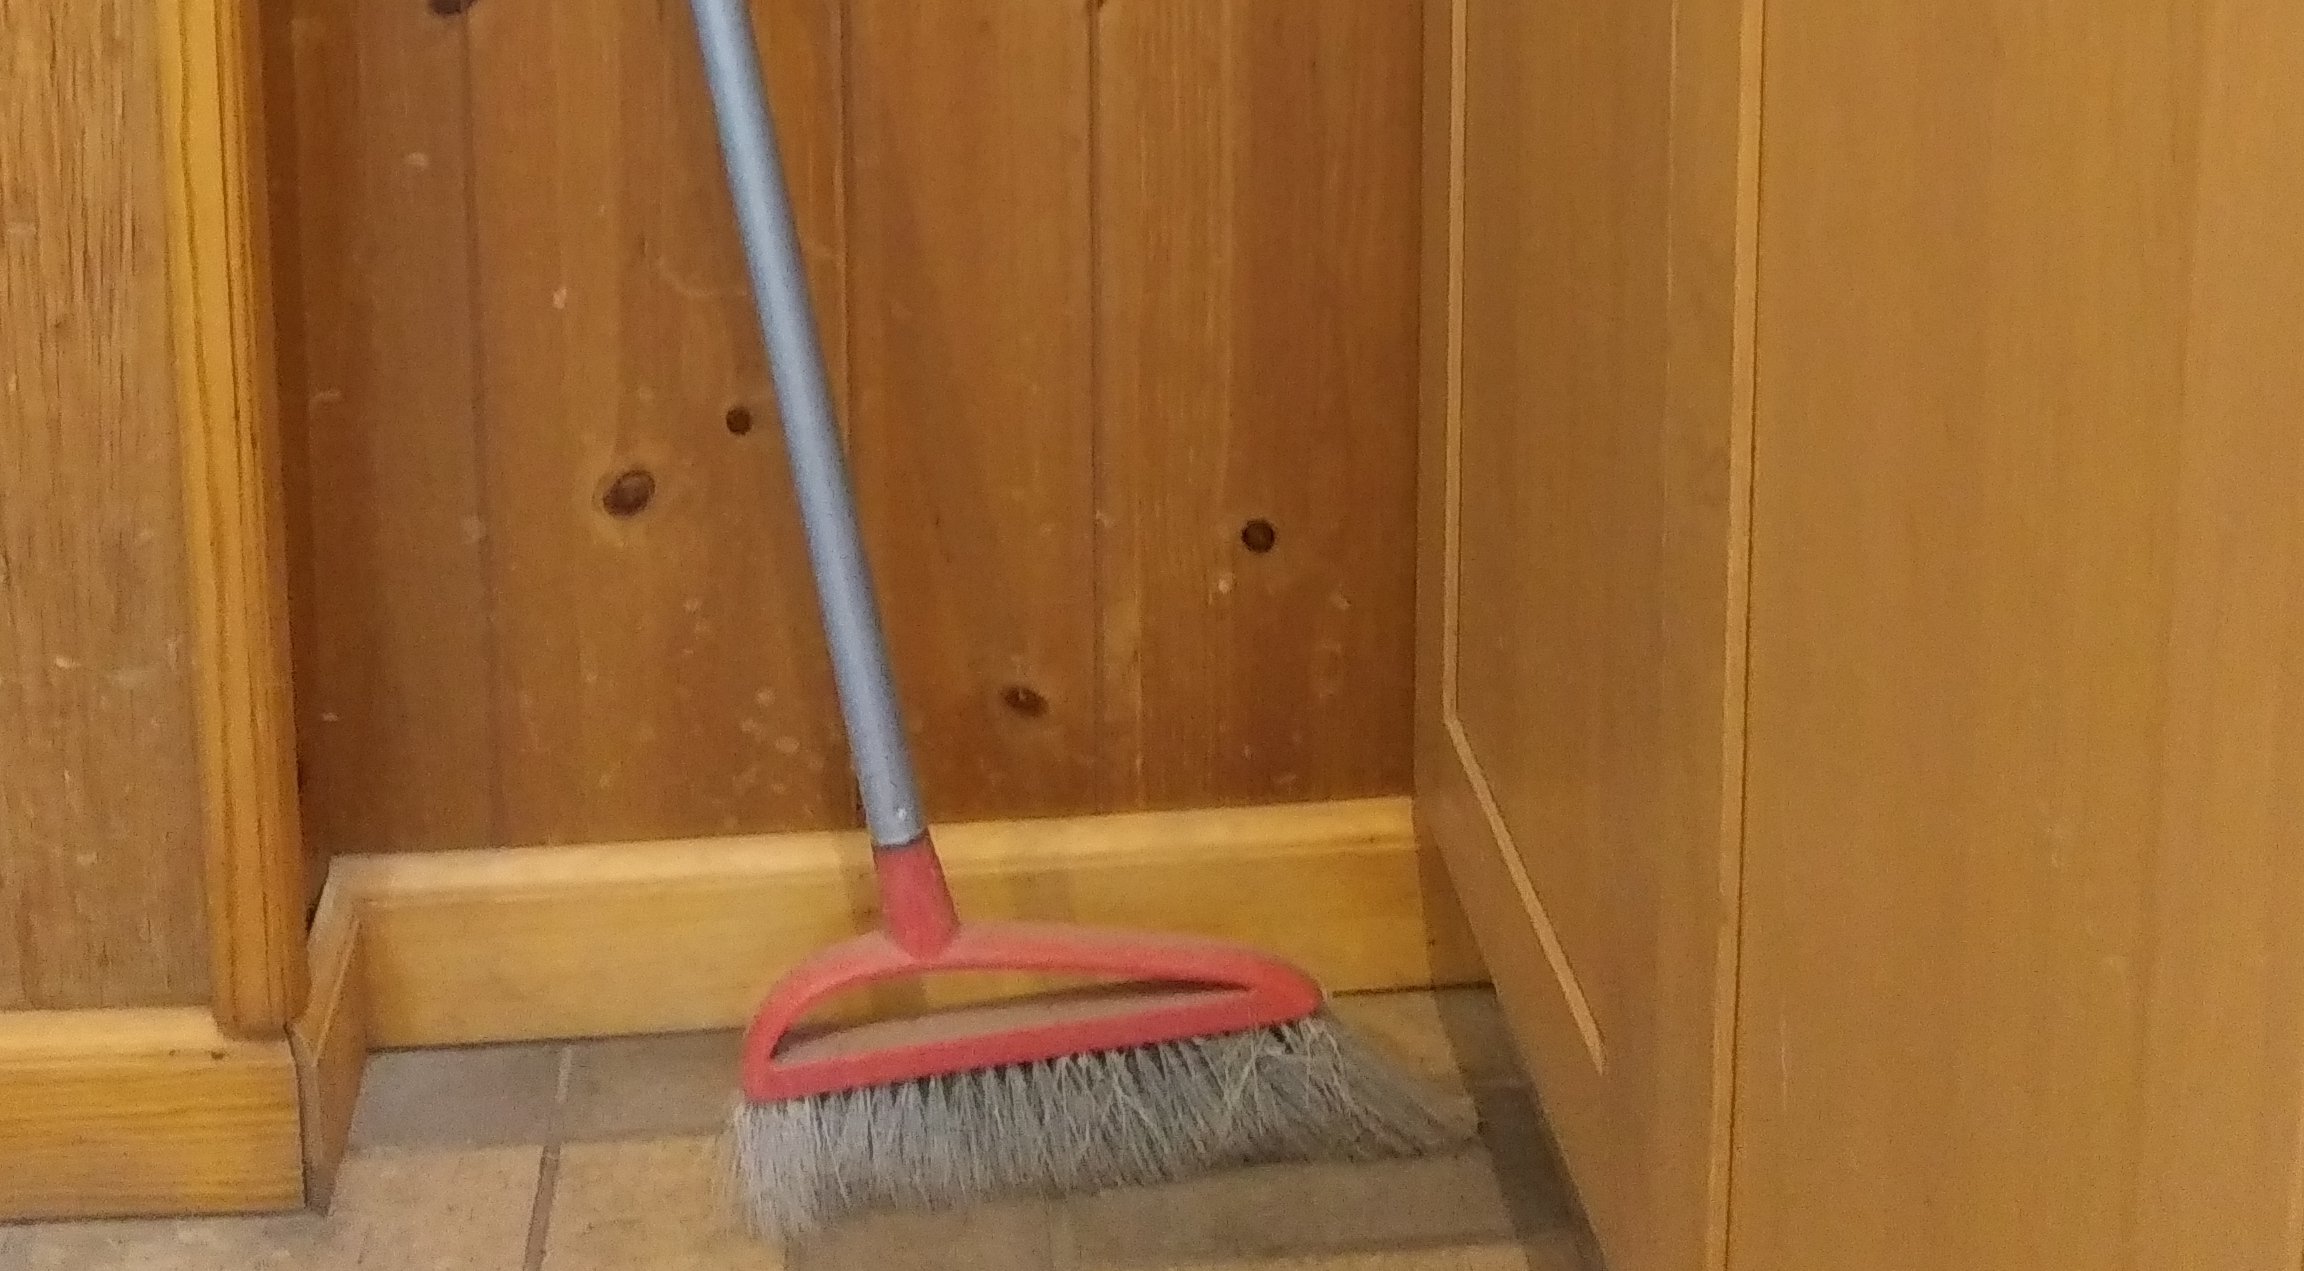 Broom leaning against paneled wall.